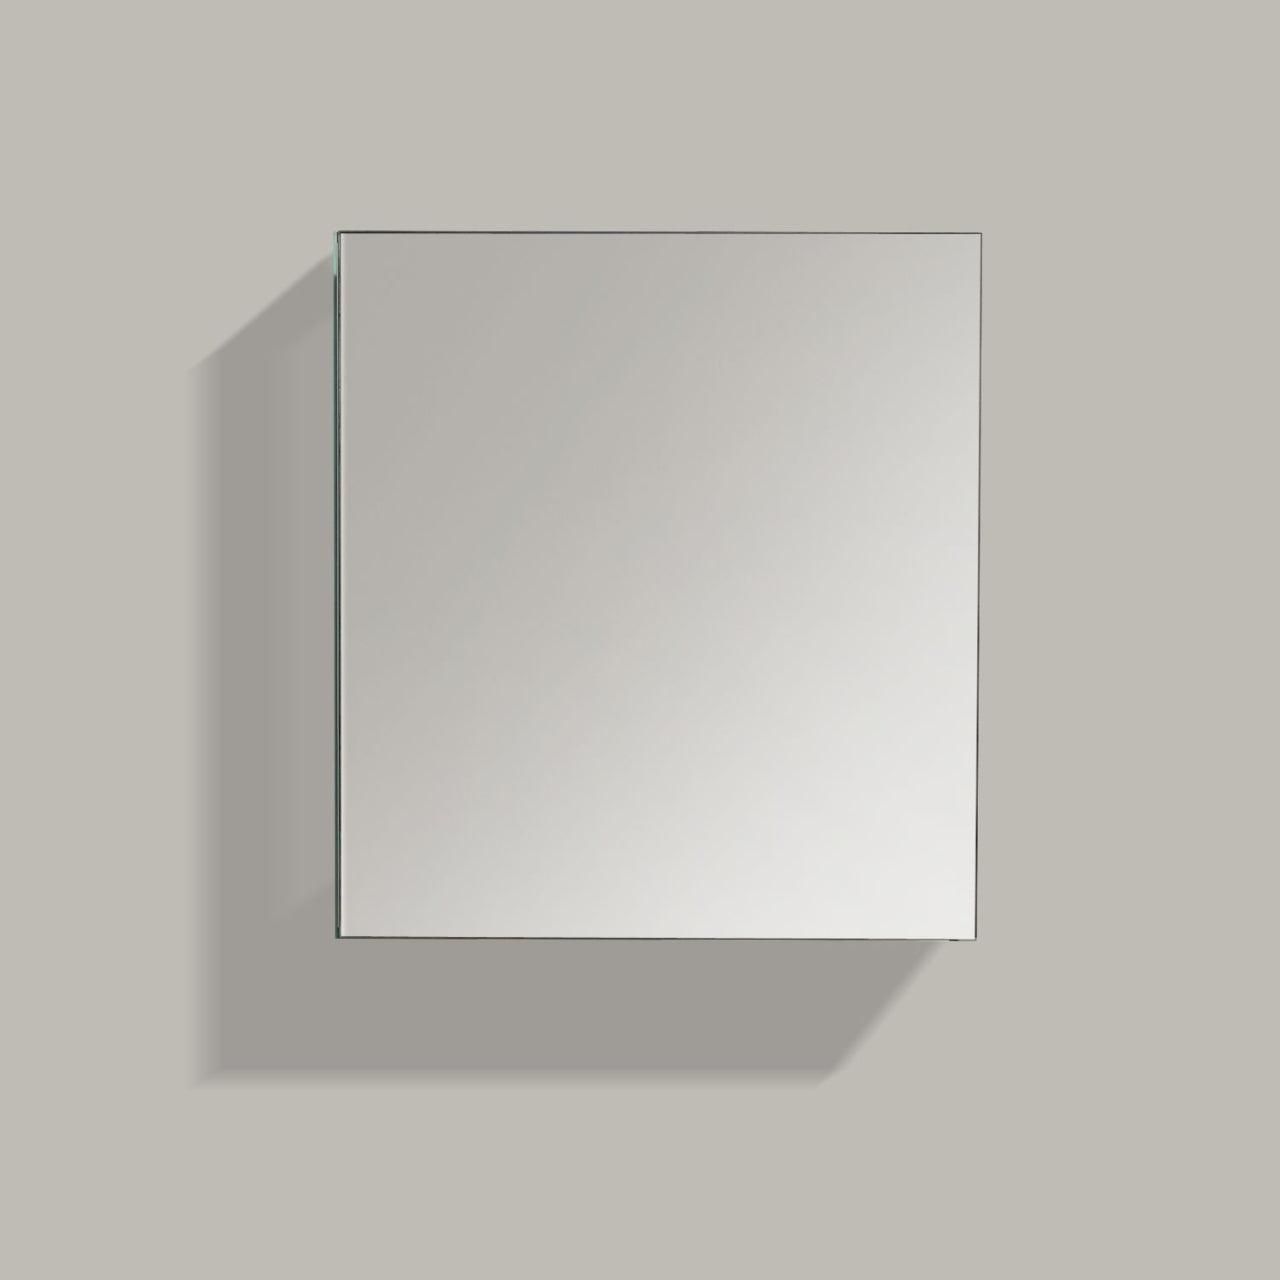 Kube 24" Mirrored  Medicine Cabinet - Home and Bath Depot